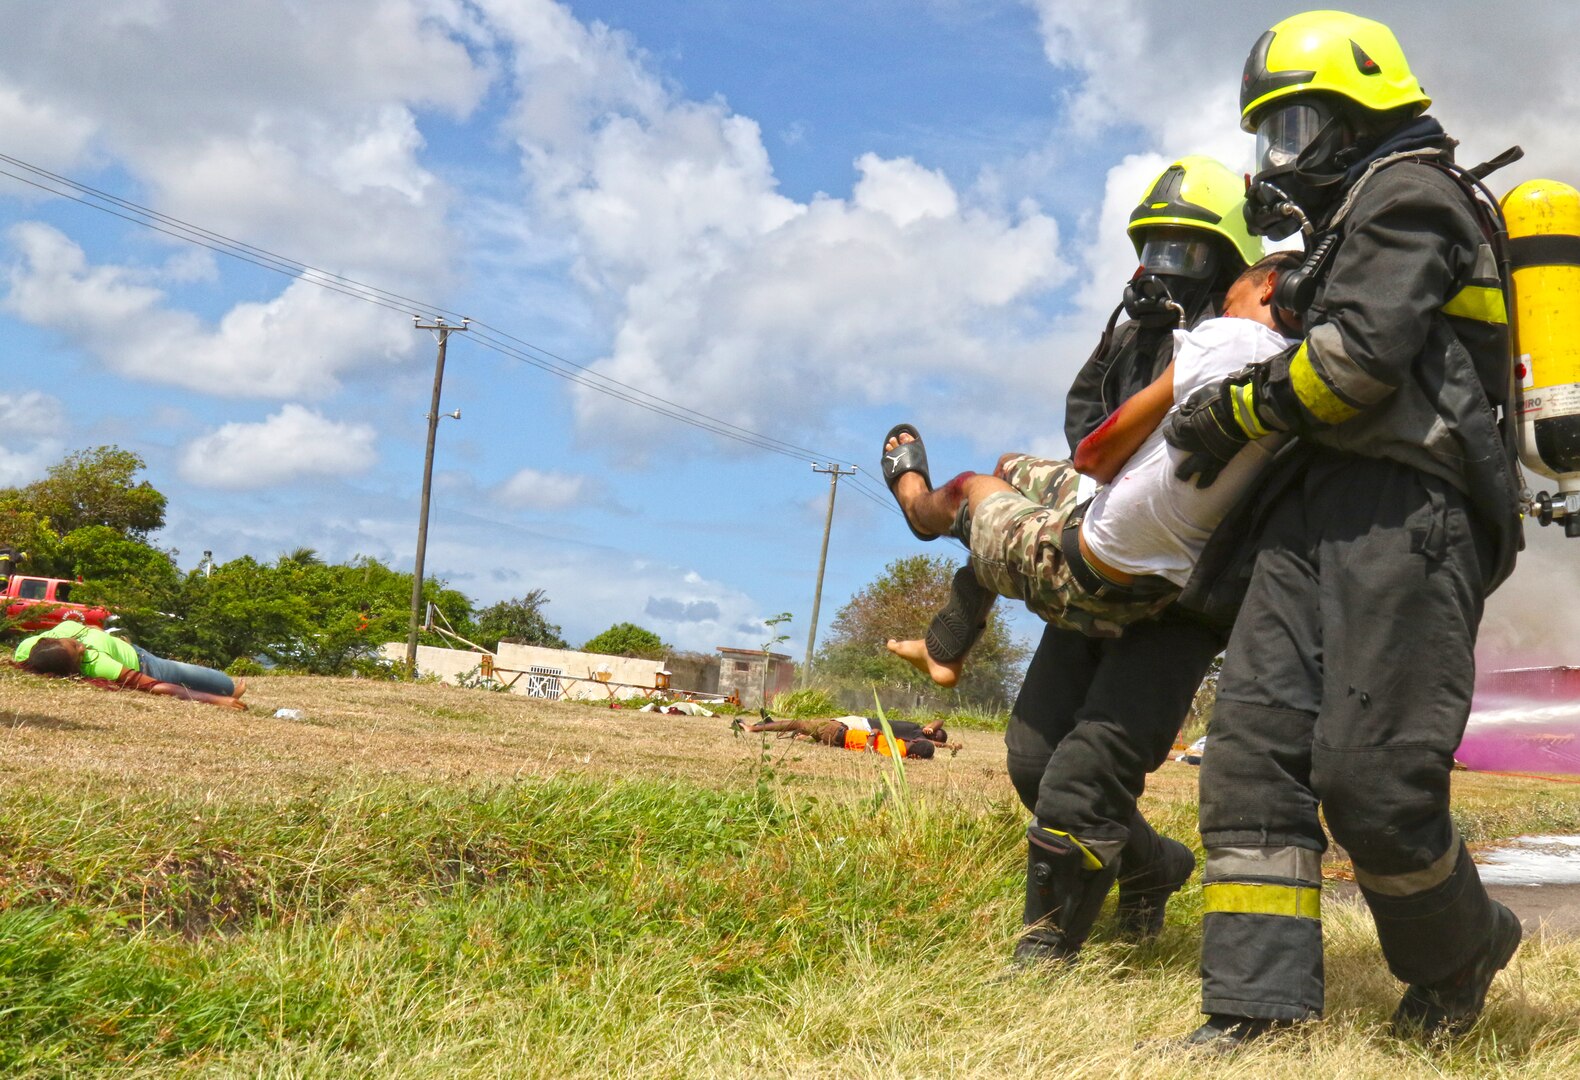 First responders conduct a simulated mass casualty drill.